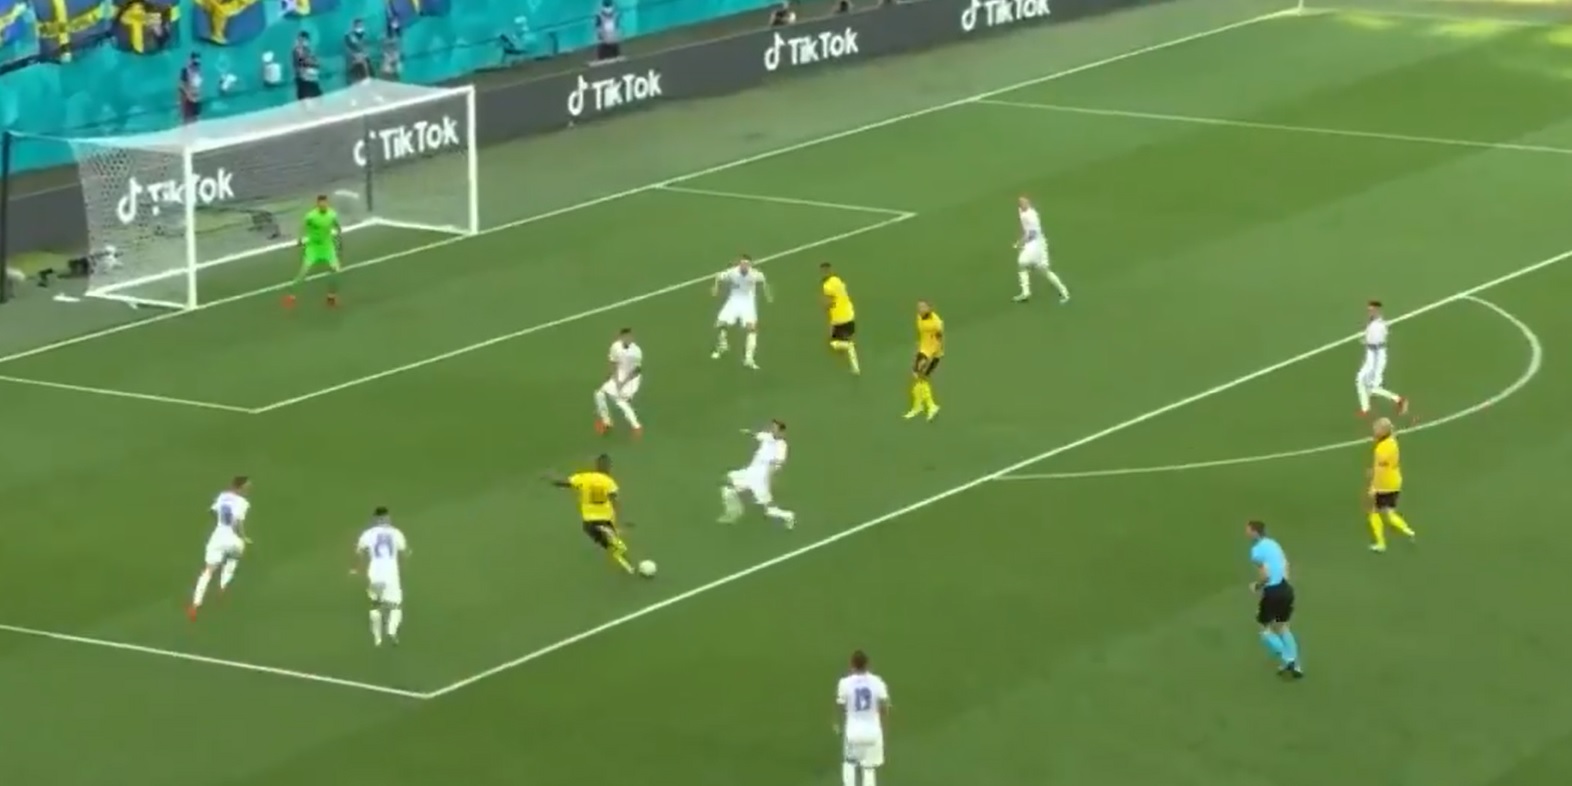 (Video) Liverpool-linked Isak’s ridiculous solo run from the halfway line sees him beat three men before firing away shot